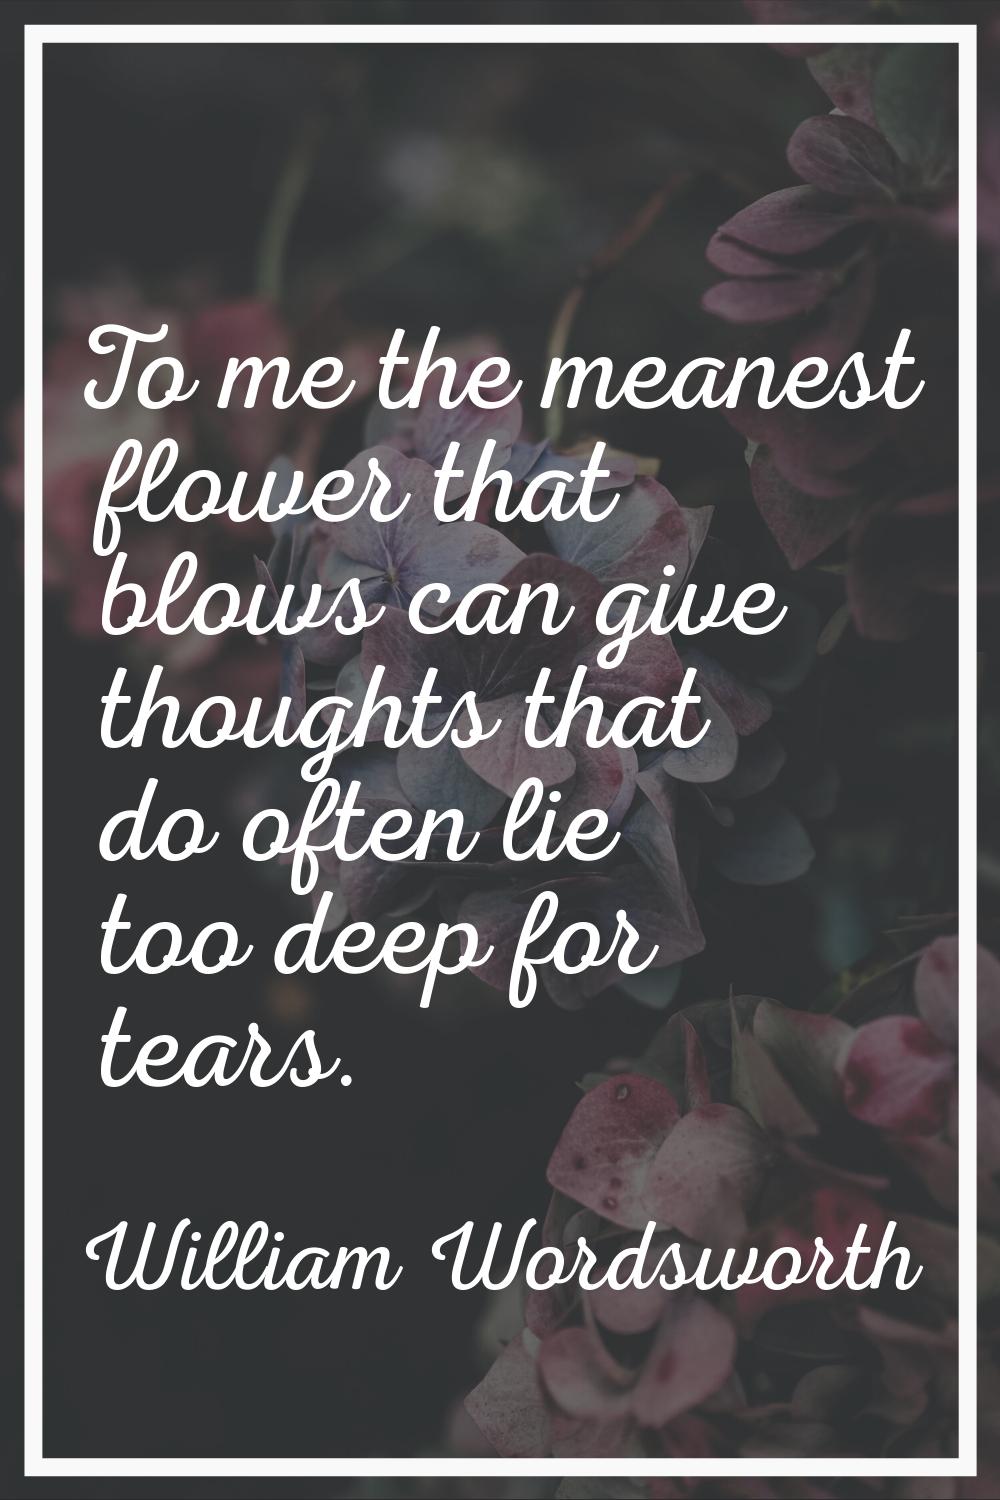 To me the meanest flower that blows can give thoughts that do often lie too deep for tears.